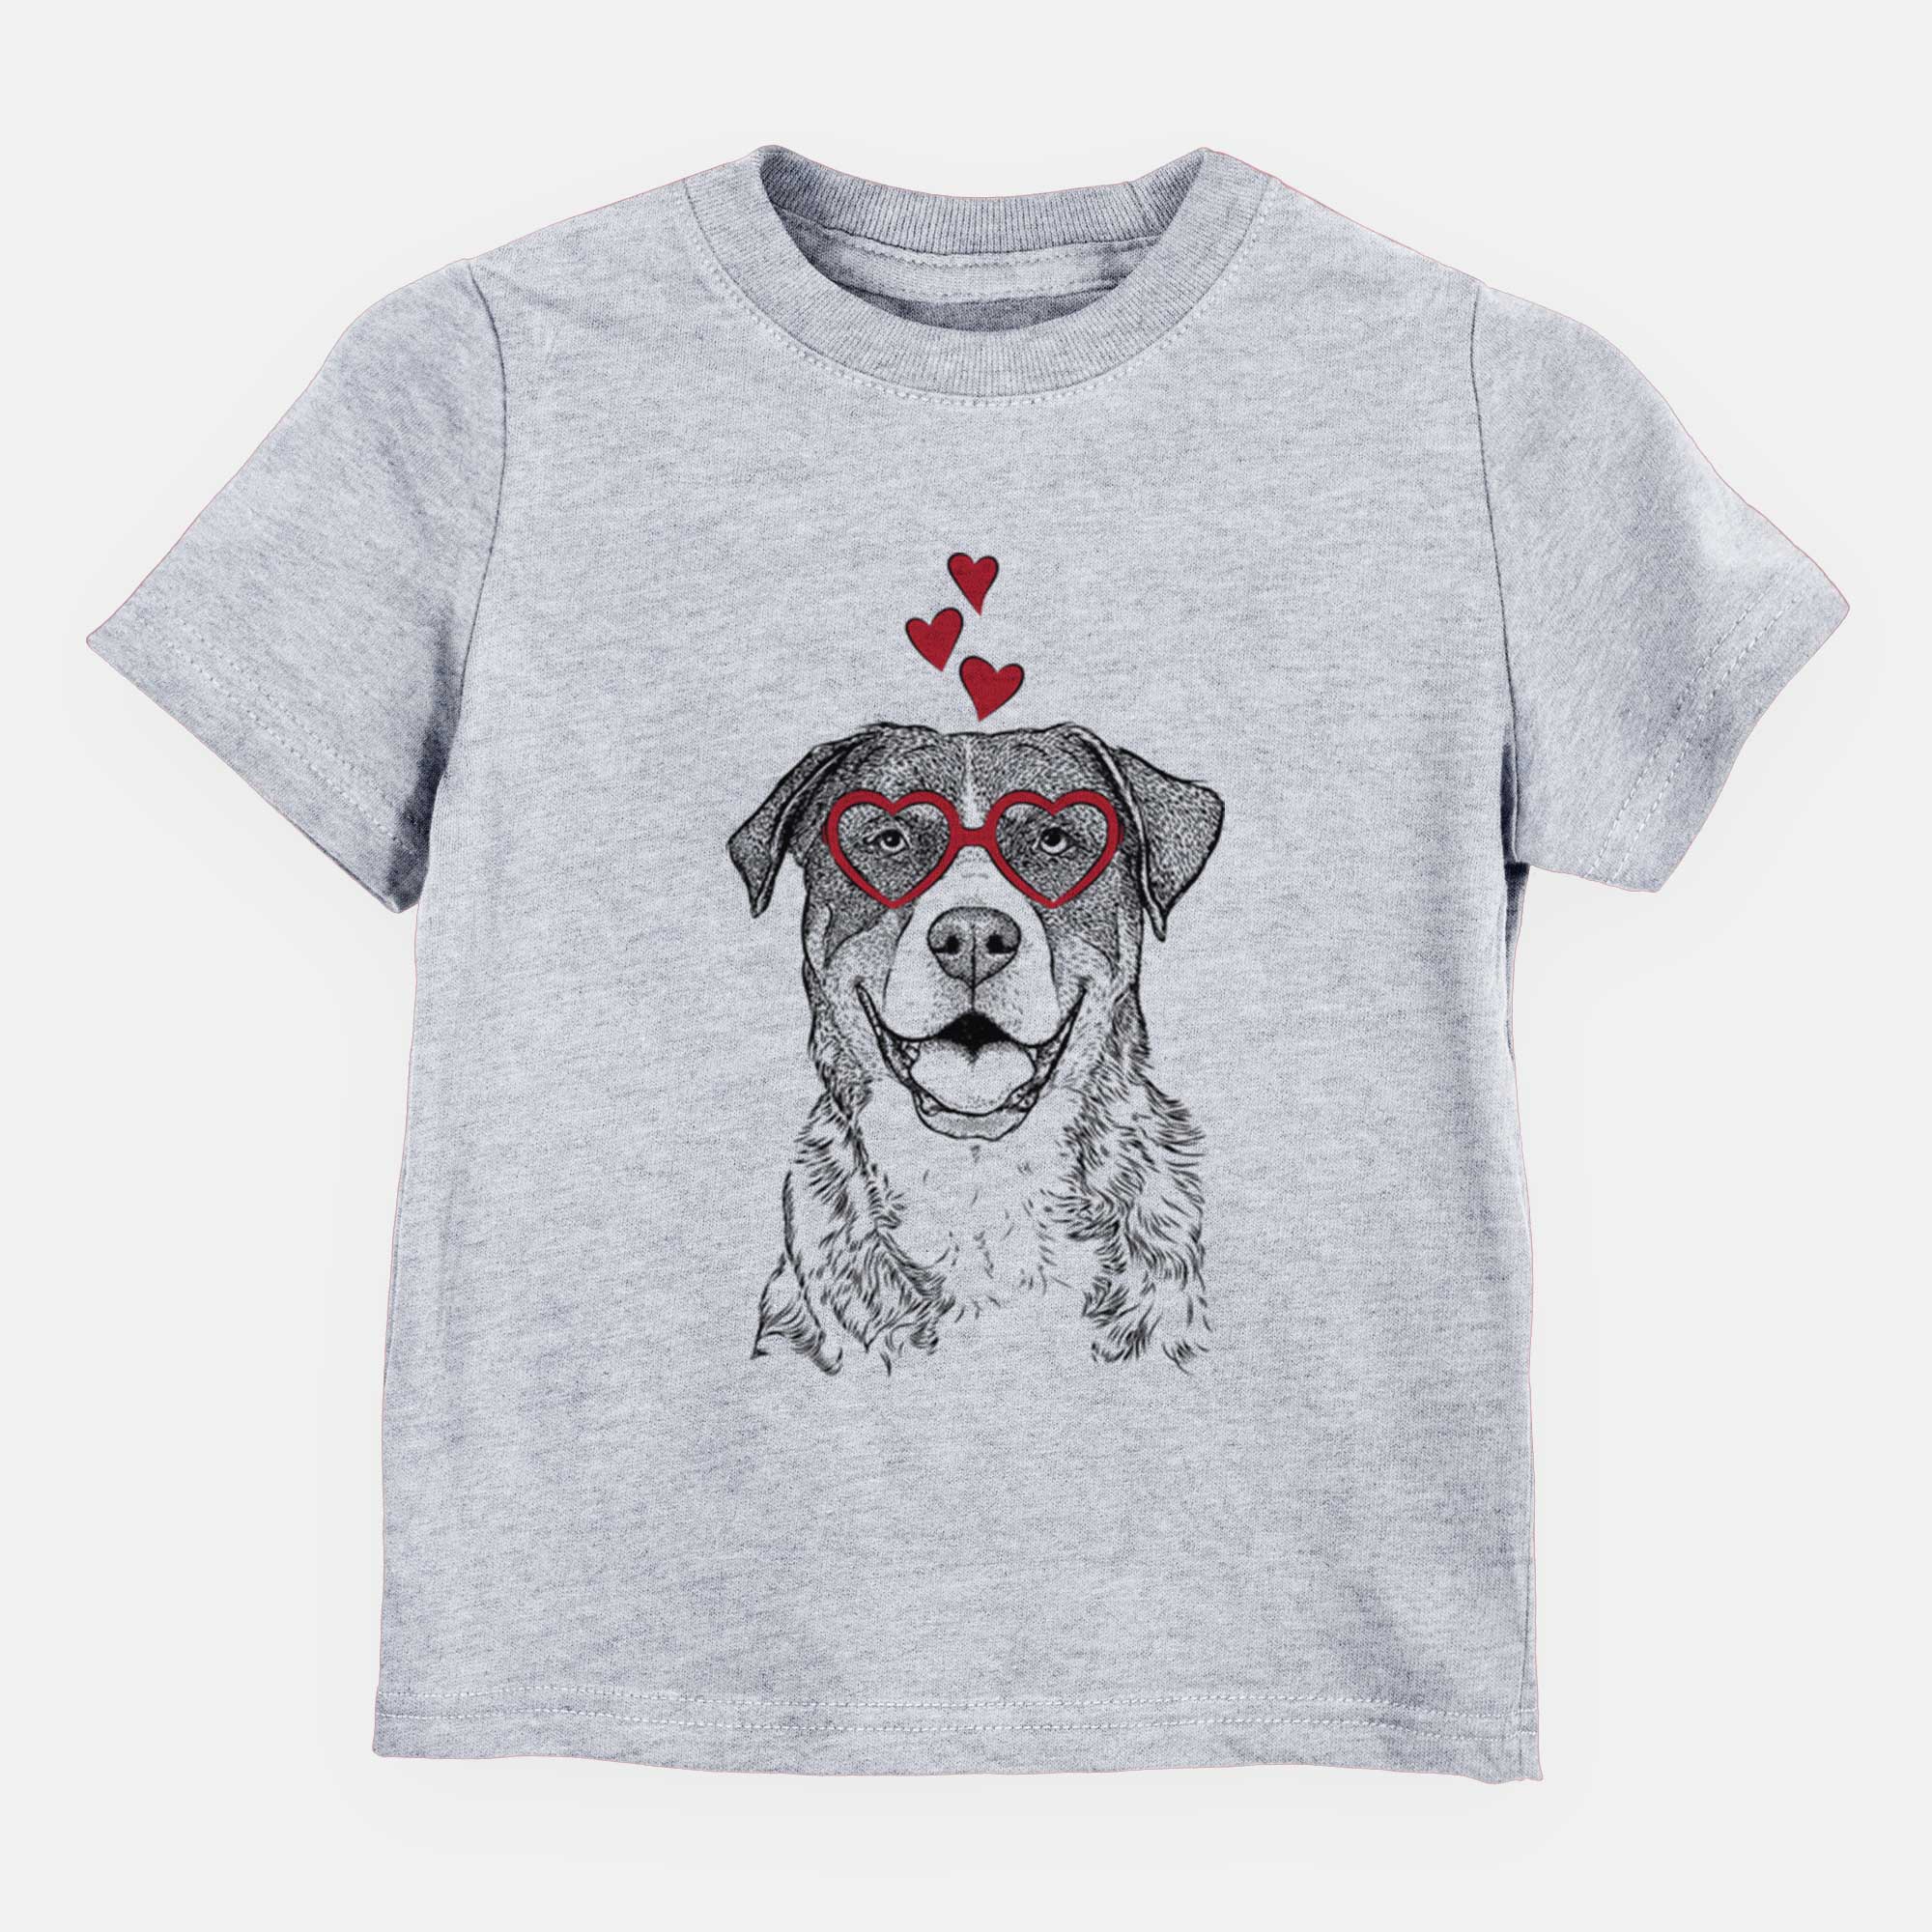 Valentine Leon the Greater Swiss Mountain Dog - Kids/Youth/Toddler Shirt